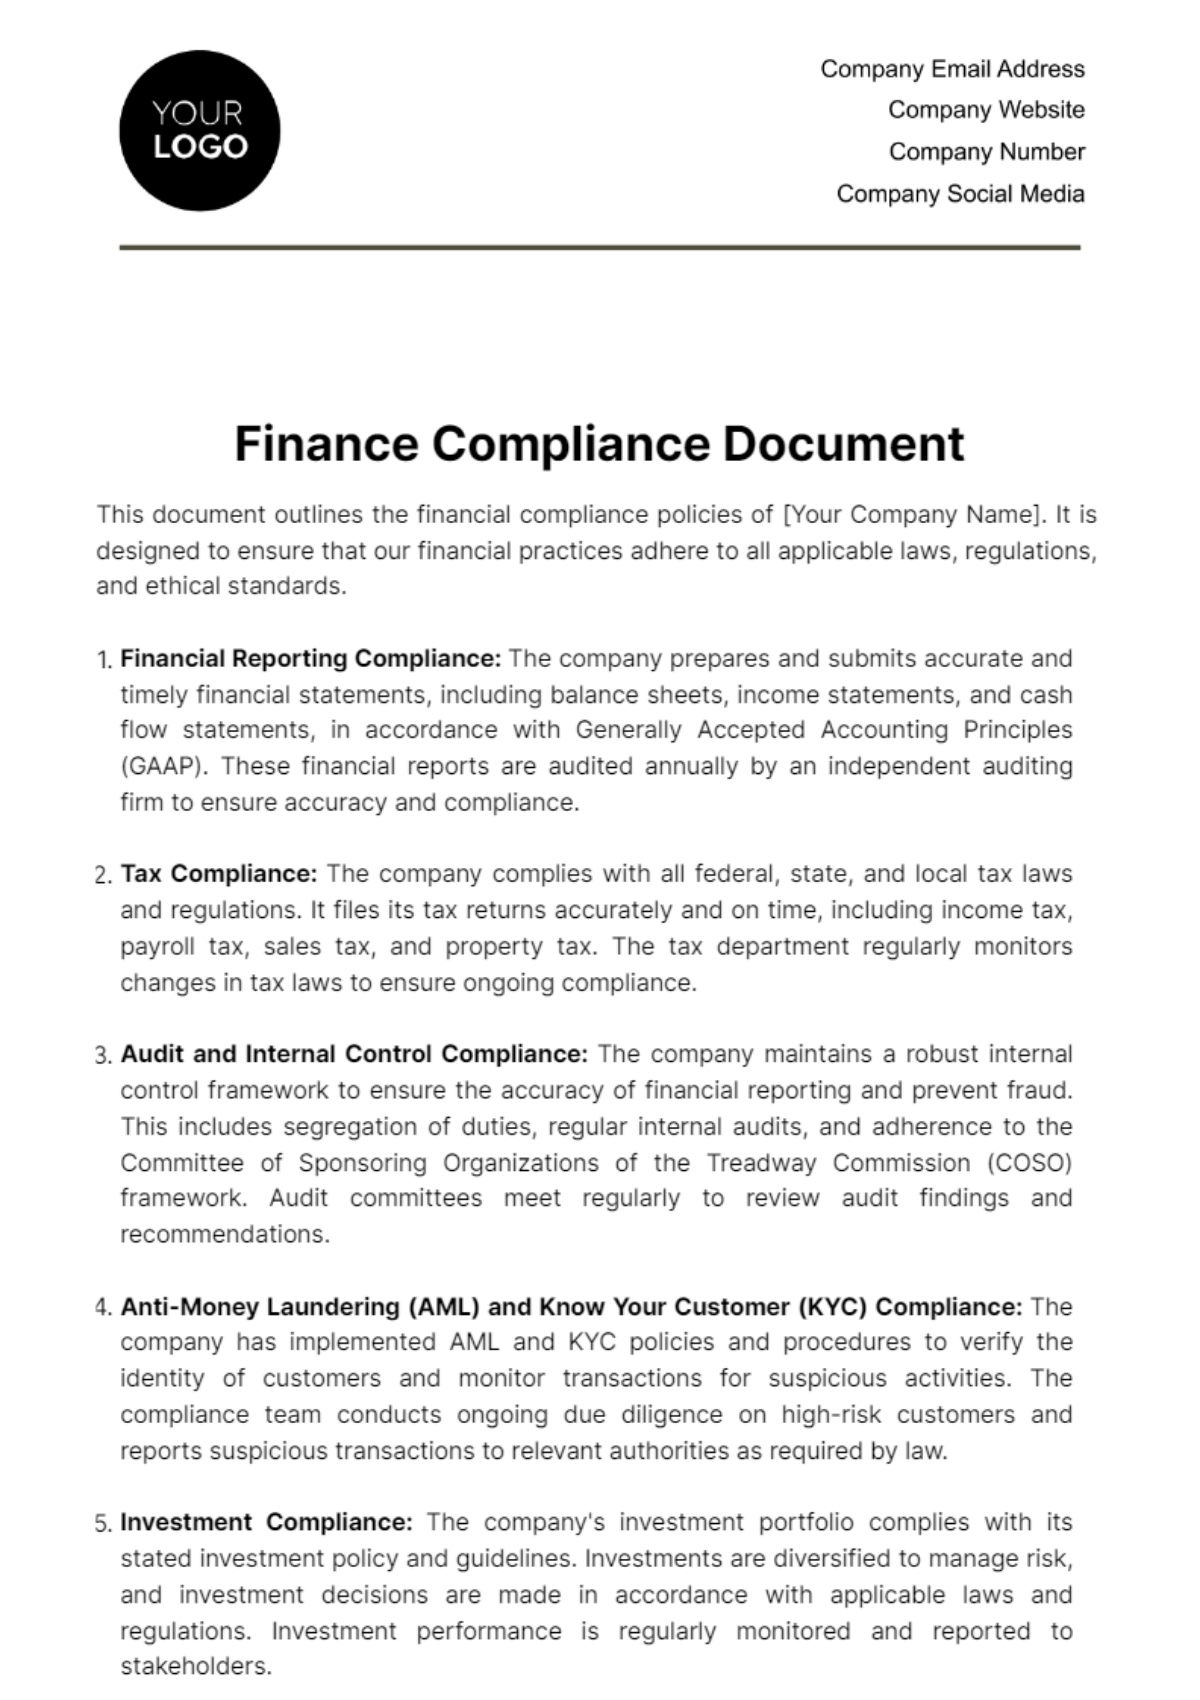 Free Financial Compliance Document Template